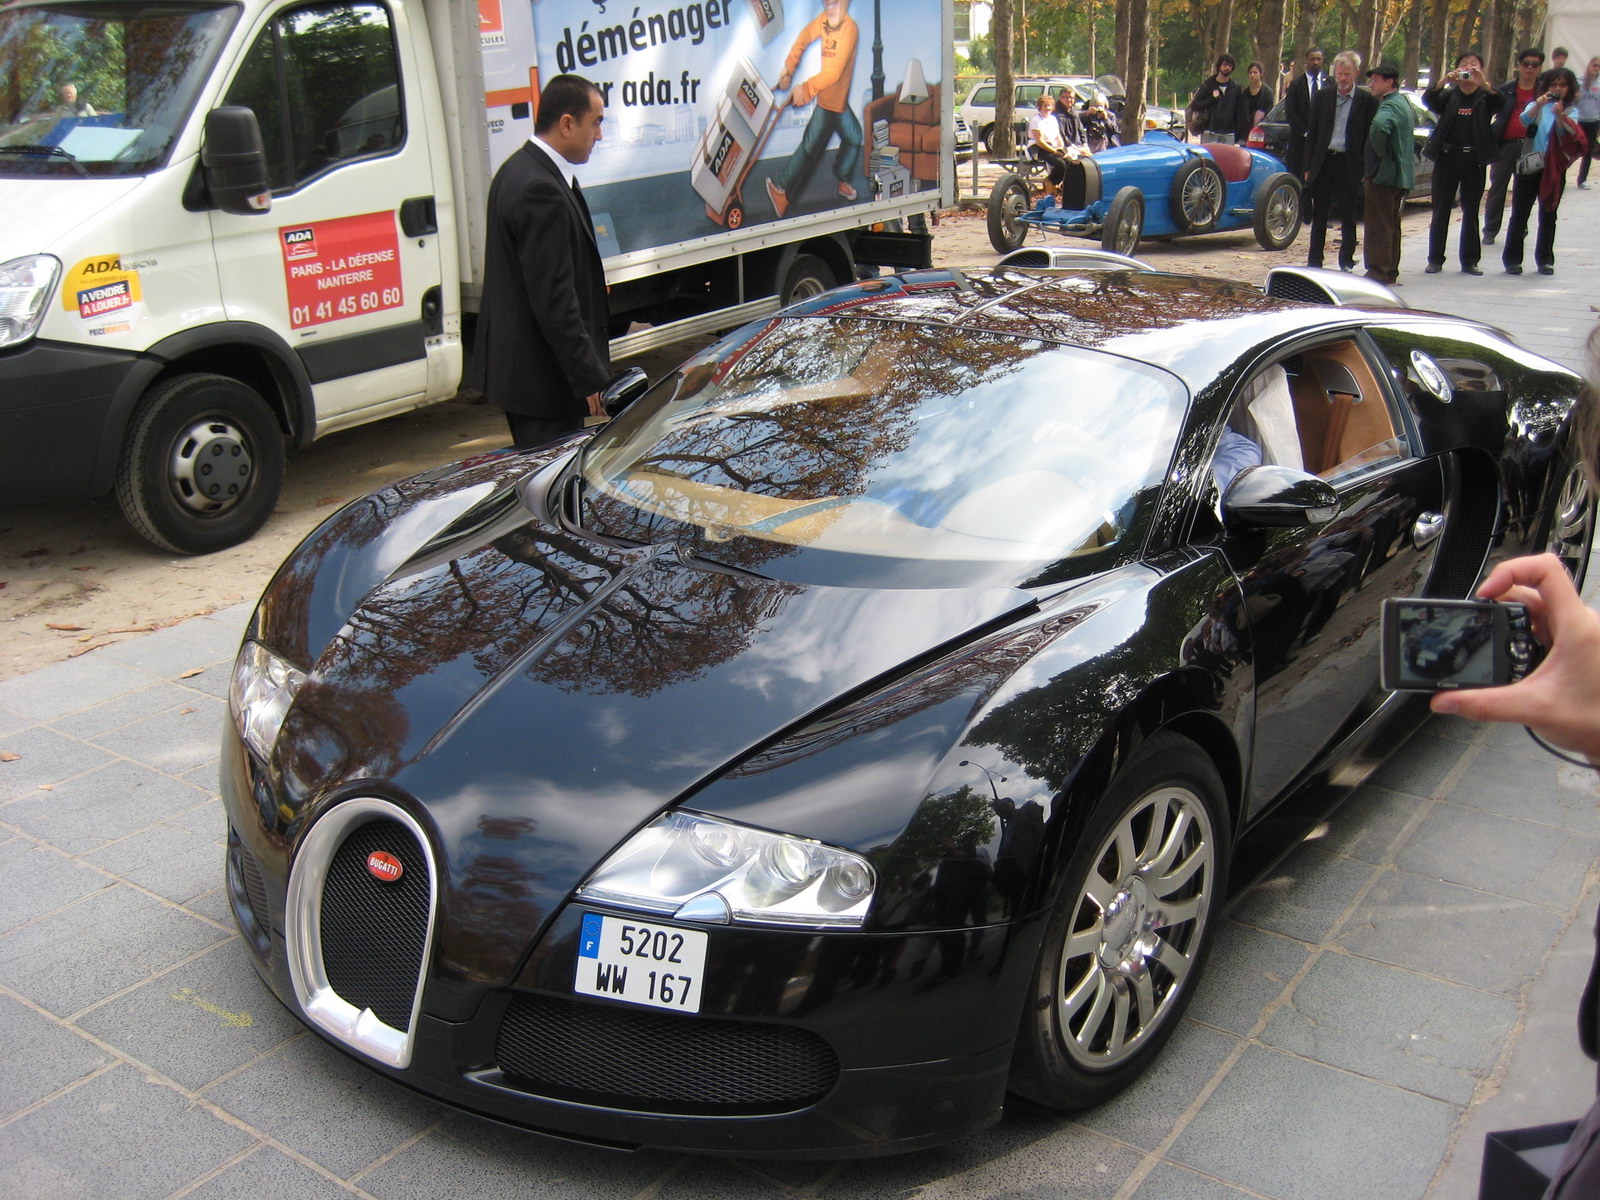 a black bugatti car parked in front of a bus